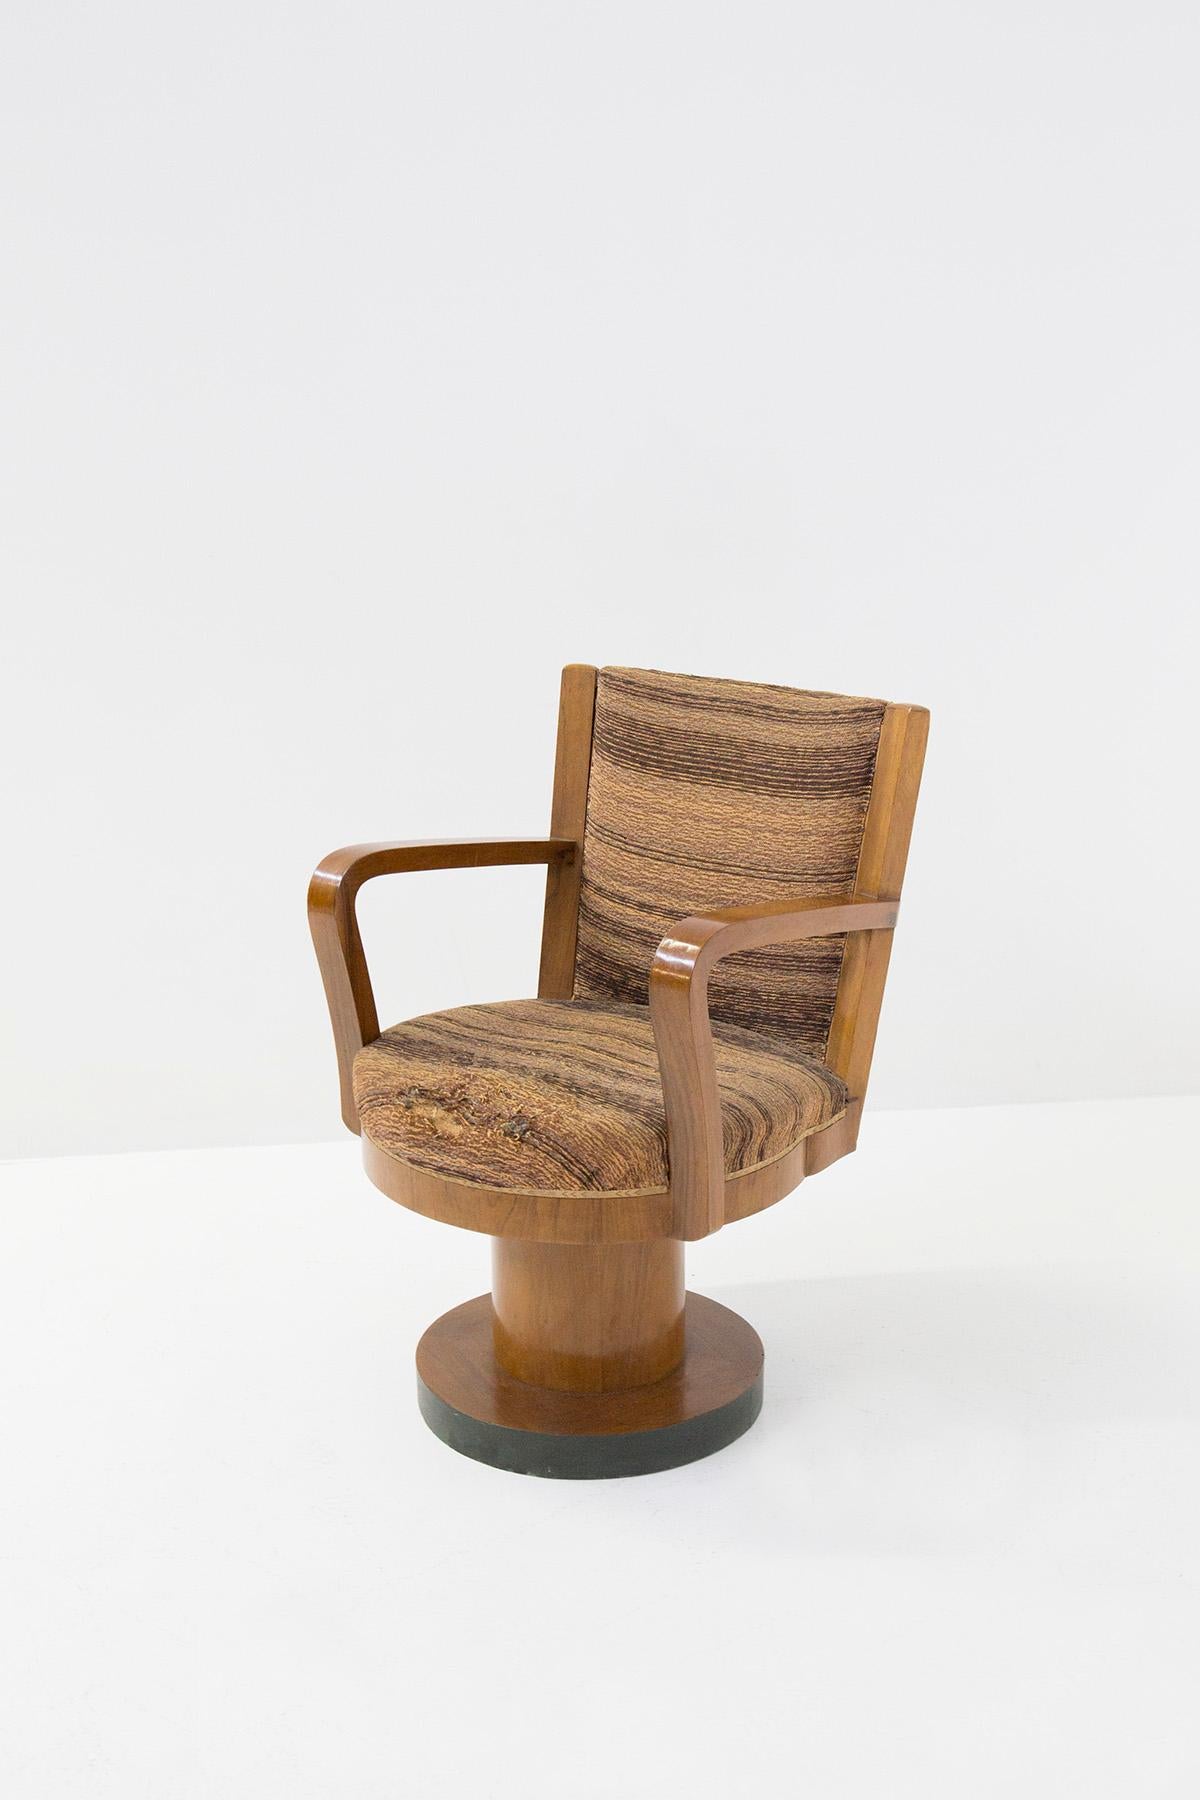 Rare armchair from the Italian Rationalism of the 1930s attributed to Piero Bottoni. The armchair is a great product of 1930s Italian design. Through its rigorous and geometric lines, typical of Italian Rationalism, the armchair conveys rigour and